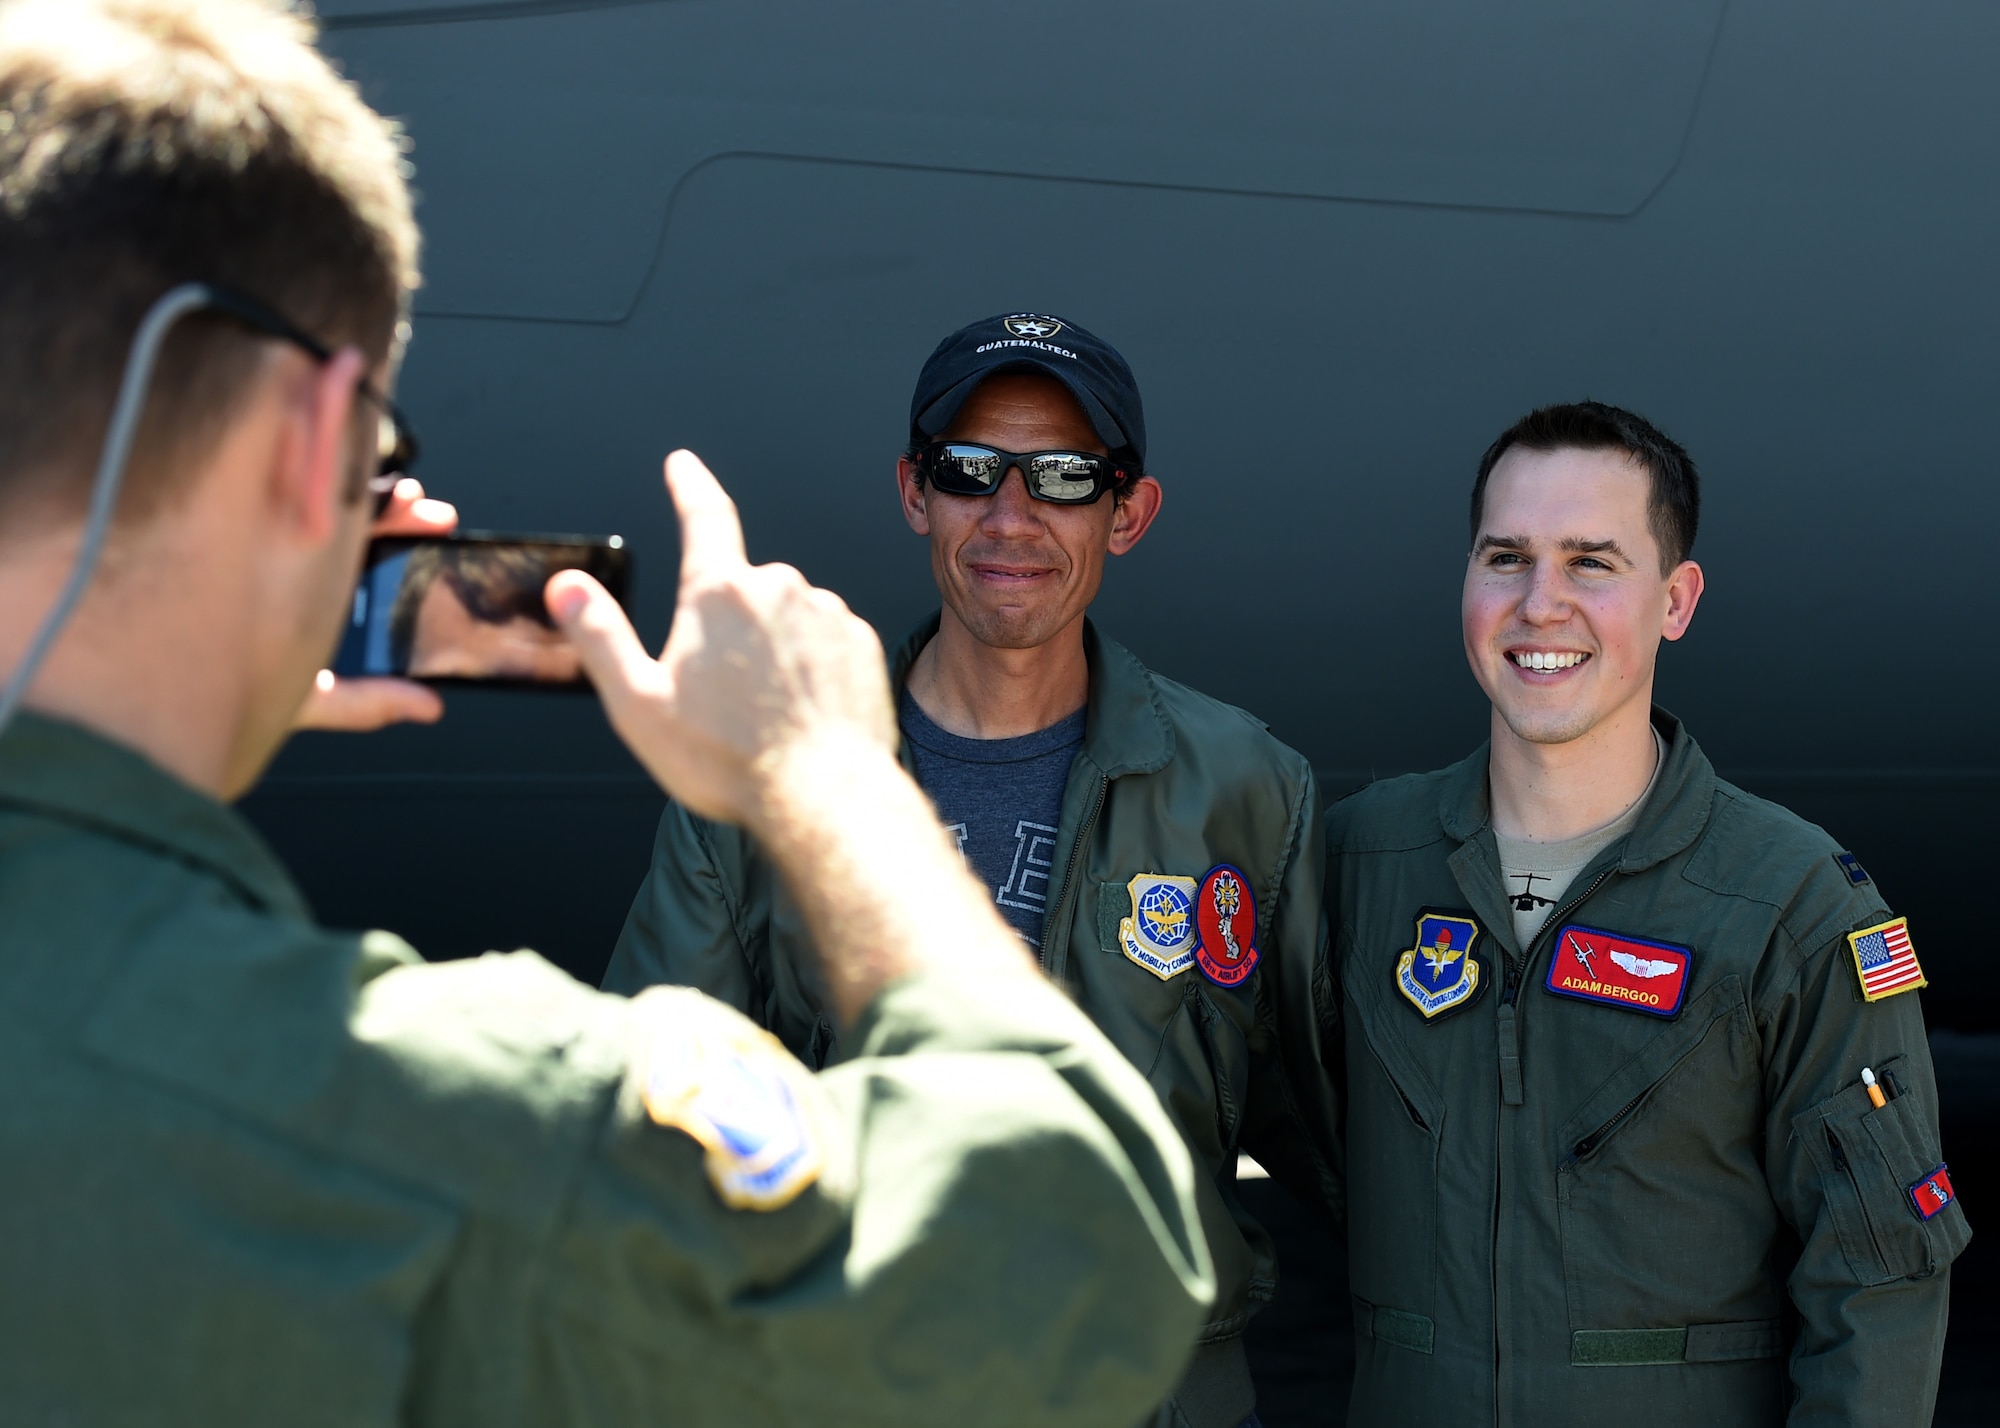 A citizen from El Salvador, has a photo taken with U.S. Air Force Capt. Adam Bergoo, 58th Airlift Squadron instructor pilot, at Ilopango International Airport in San Salvador, El Savador, Jan. 30, during the 2016 Ilopango Airshow. A U.S. Air Force C-17 Globemaster III cargo aircraft was sent from Altus Air Force Base, Okla., to foster relationships between the U.S. and El Salvador. The aircraft was setup as a static display for the natives to view and learn about some of its capabilities. (U.S. Air Force photo by Senior Airman Franklin R. Ramos/Released)